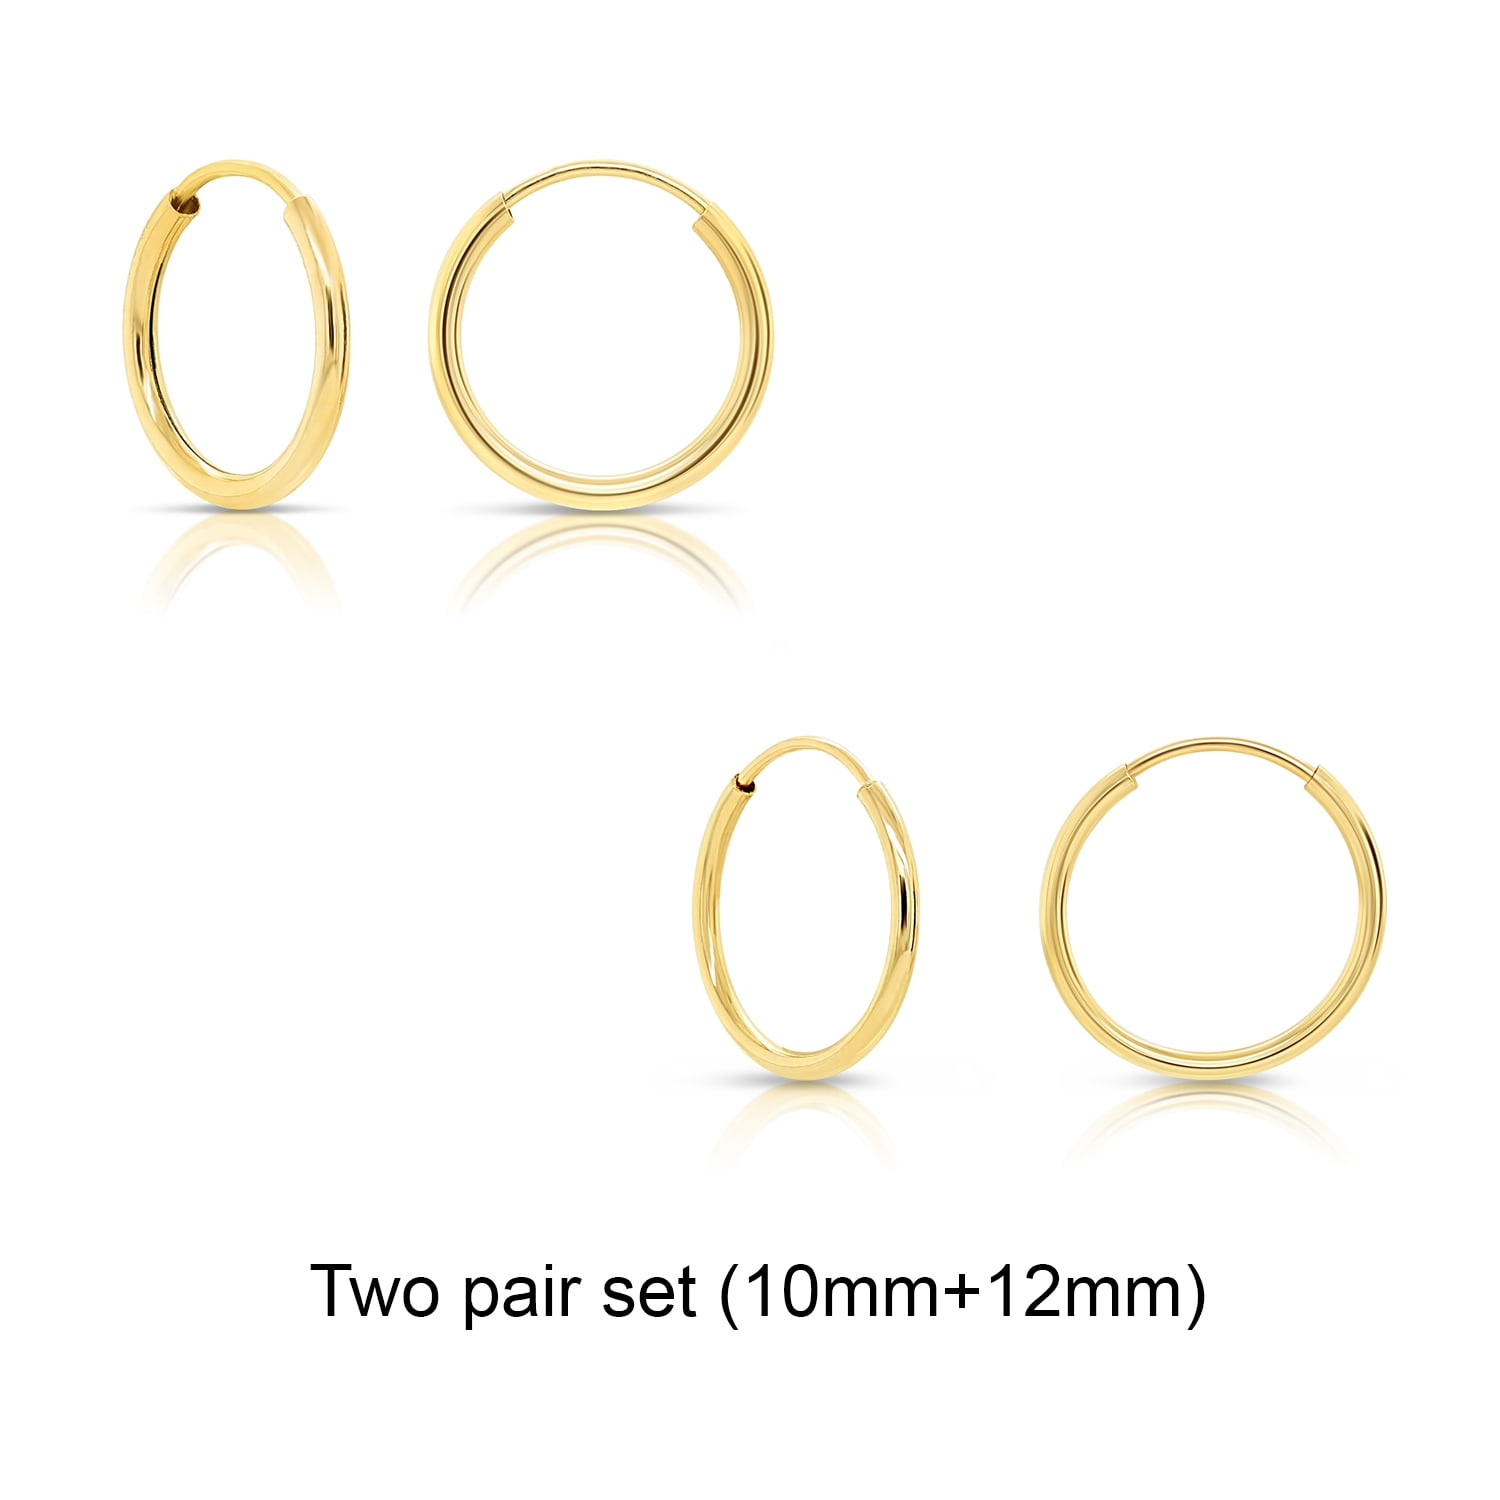 Sonia Jewels 14k White Yellow And White Tri Color Gold Design Plain Huggie Endless Hoop Womens Earrings 11MM X 11MM